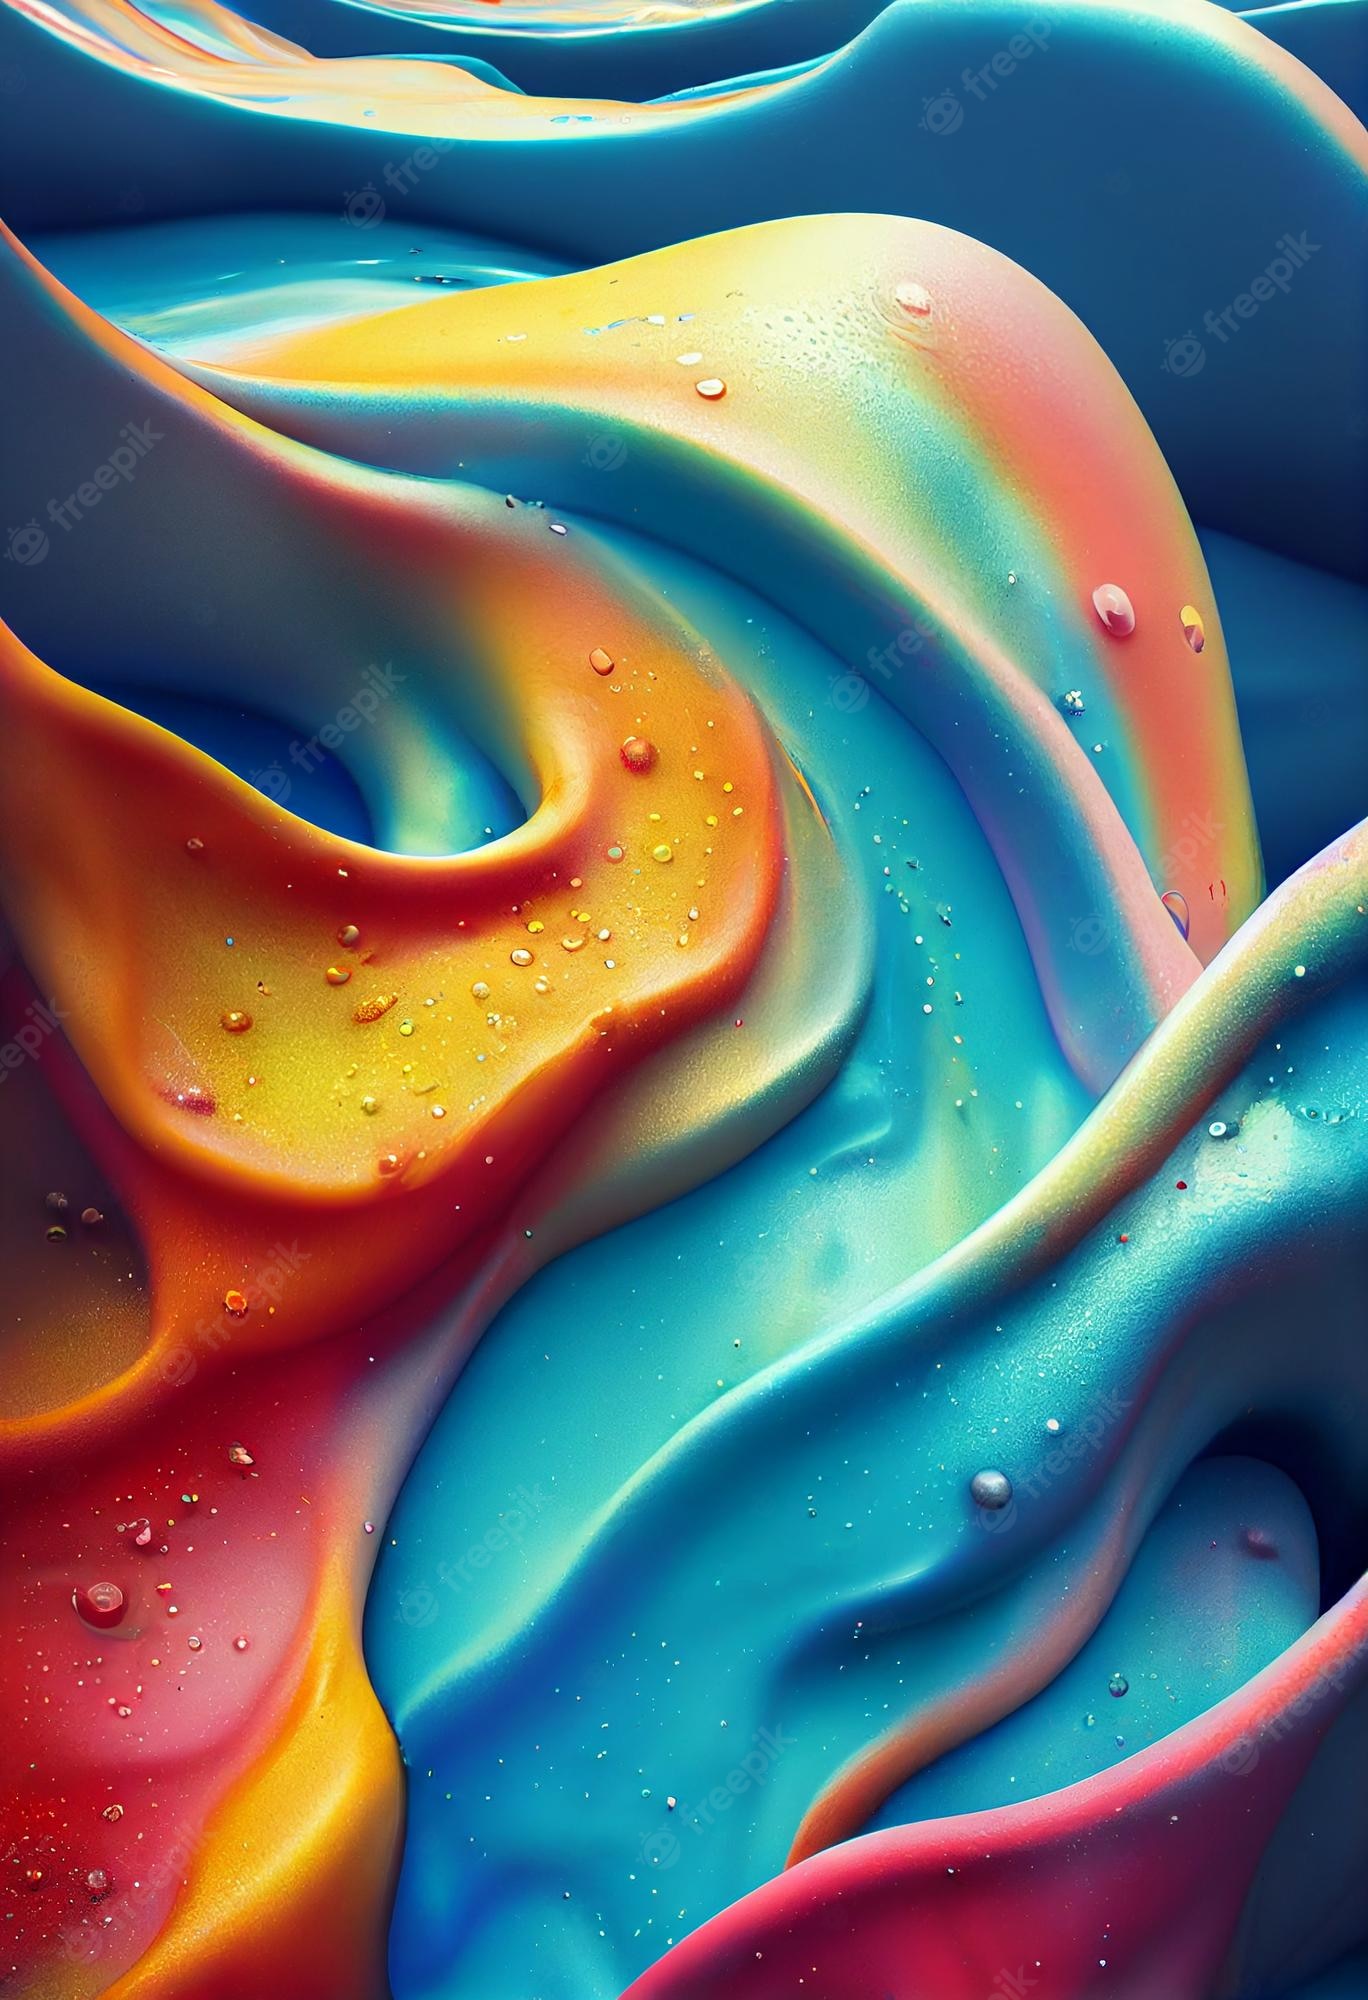 Colorful Textured Abstract Wallpapers